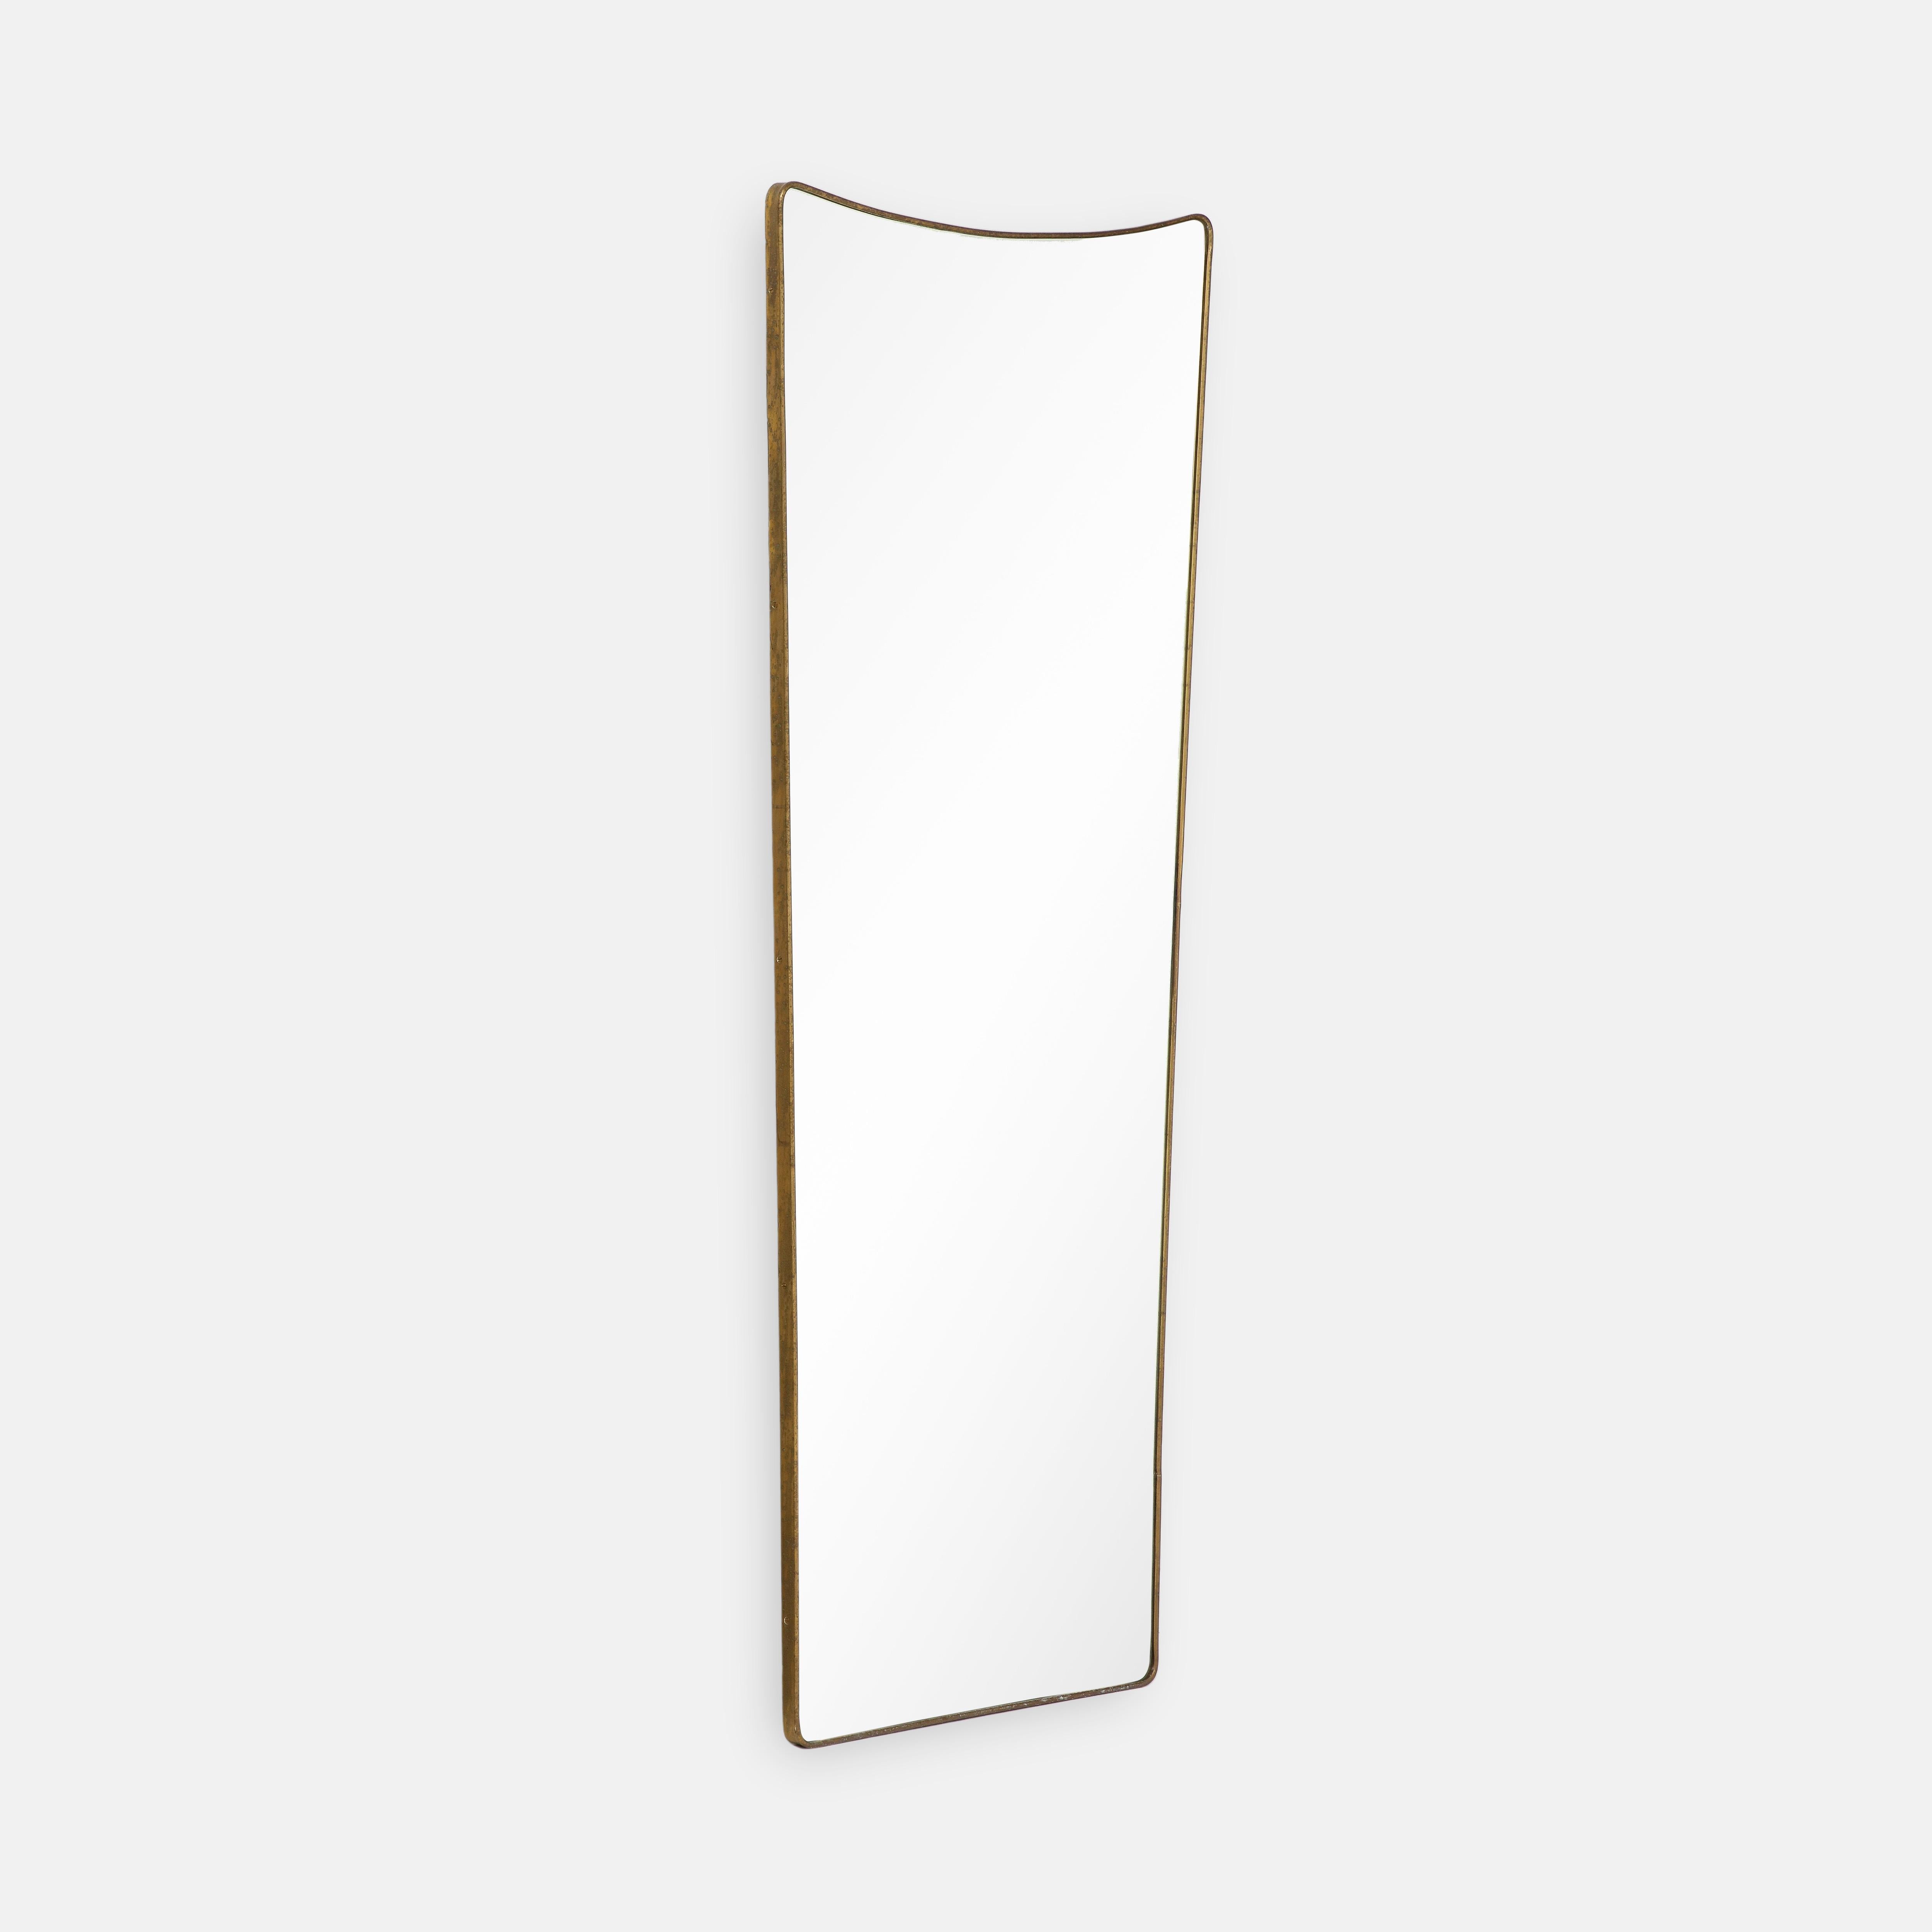 1950s Italian modernist grand scale wall mirror consisting of shaped brass frame with gently arched and rounded top which slightly tapers towards the bottom This chic and rare mirror is large and striking in size and can also be used as a standing